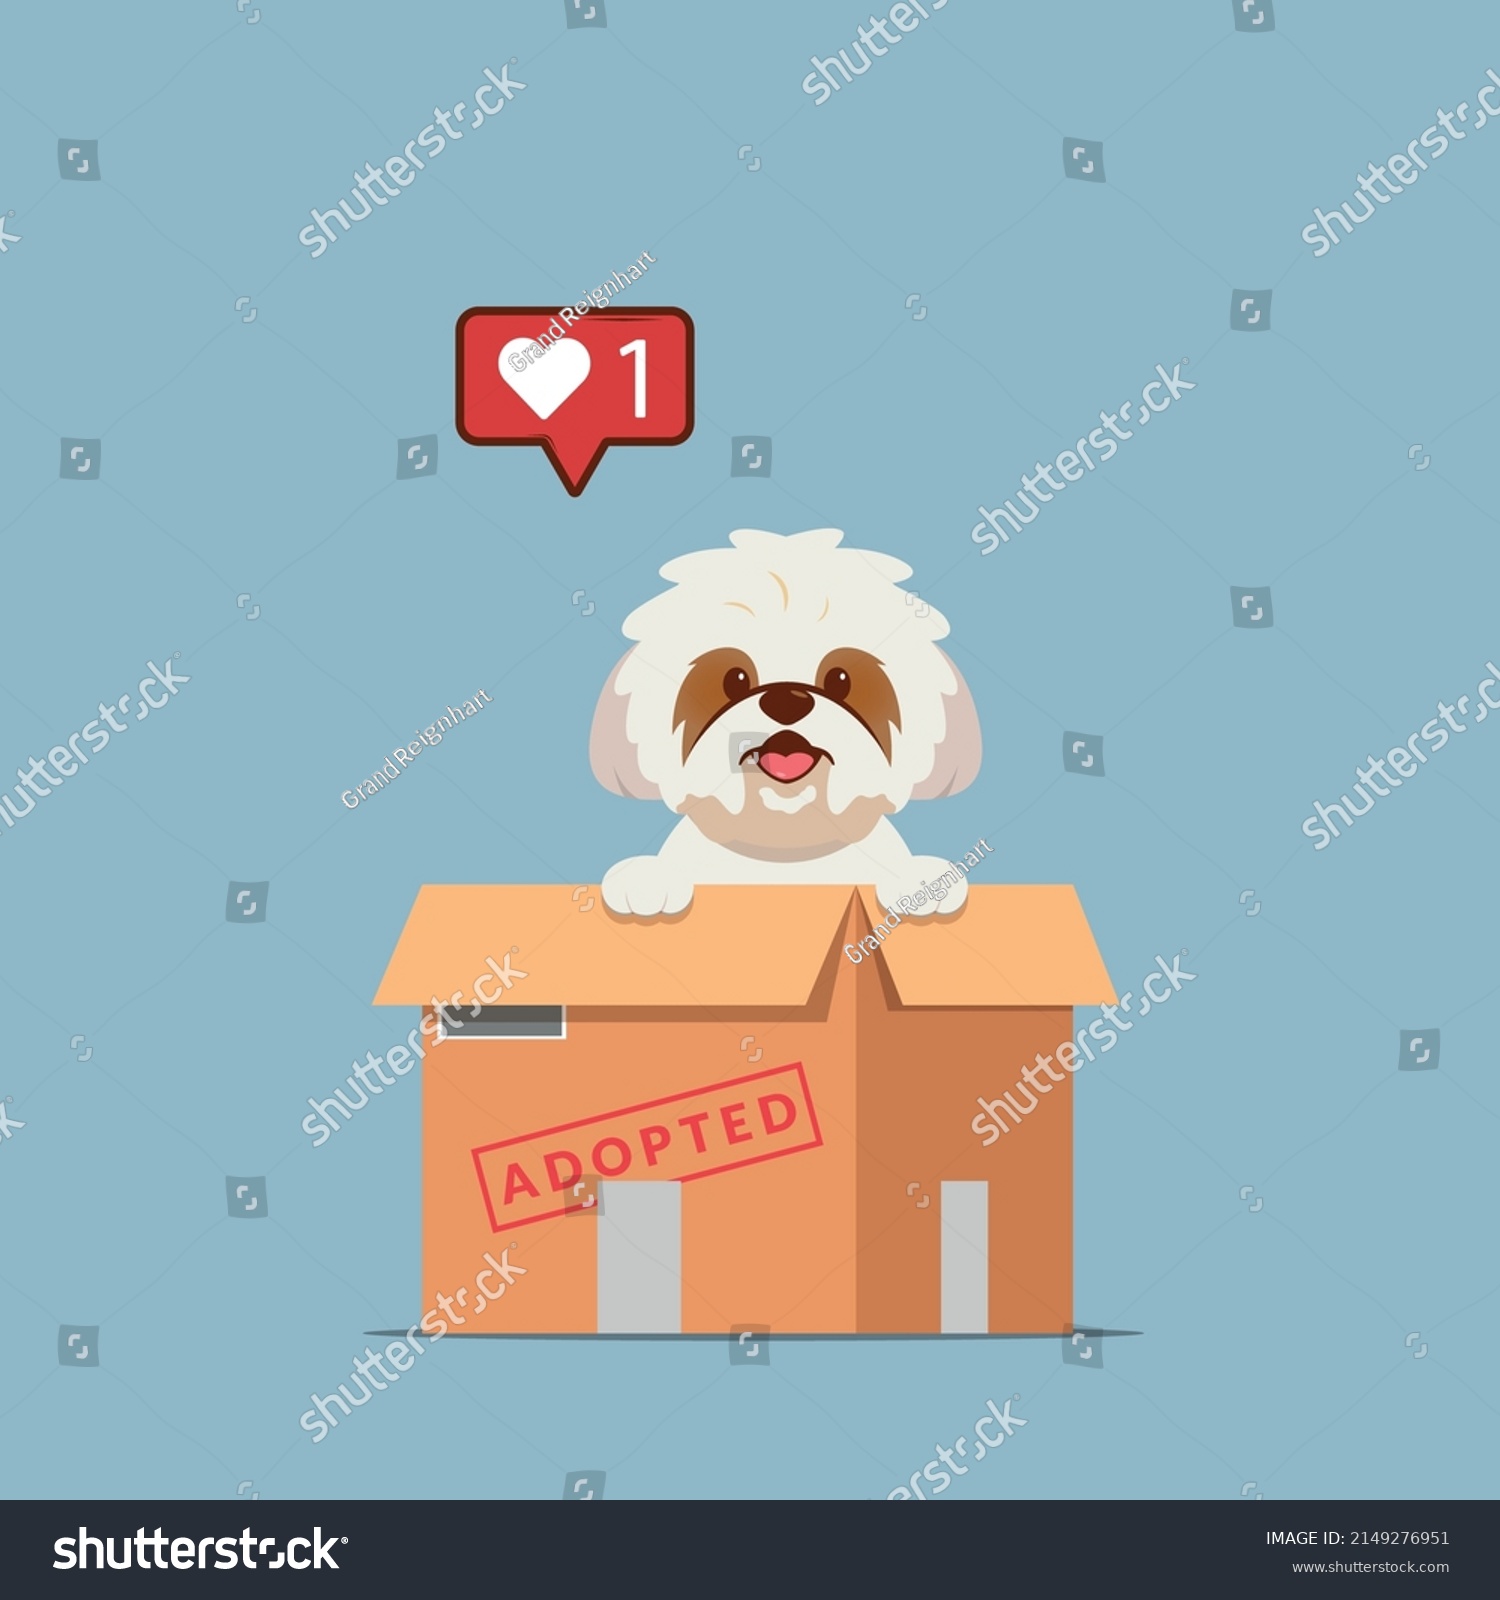 SVG of Adopt pet concept illustration. Dog rescue, protection, adoption concept. Flyer, poster template.Cute shih tzu puppy in a box. svg